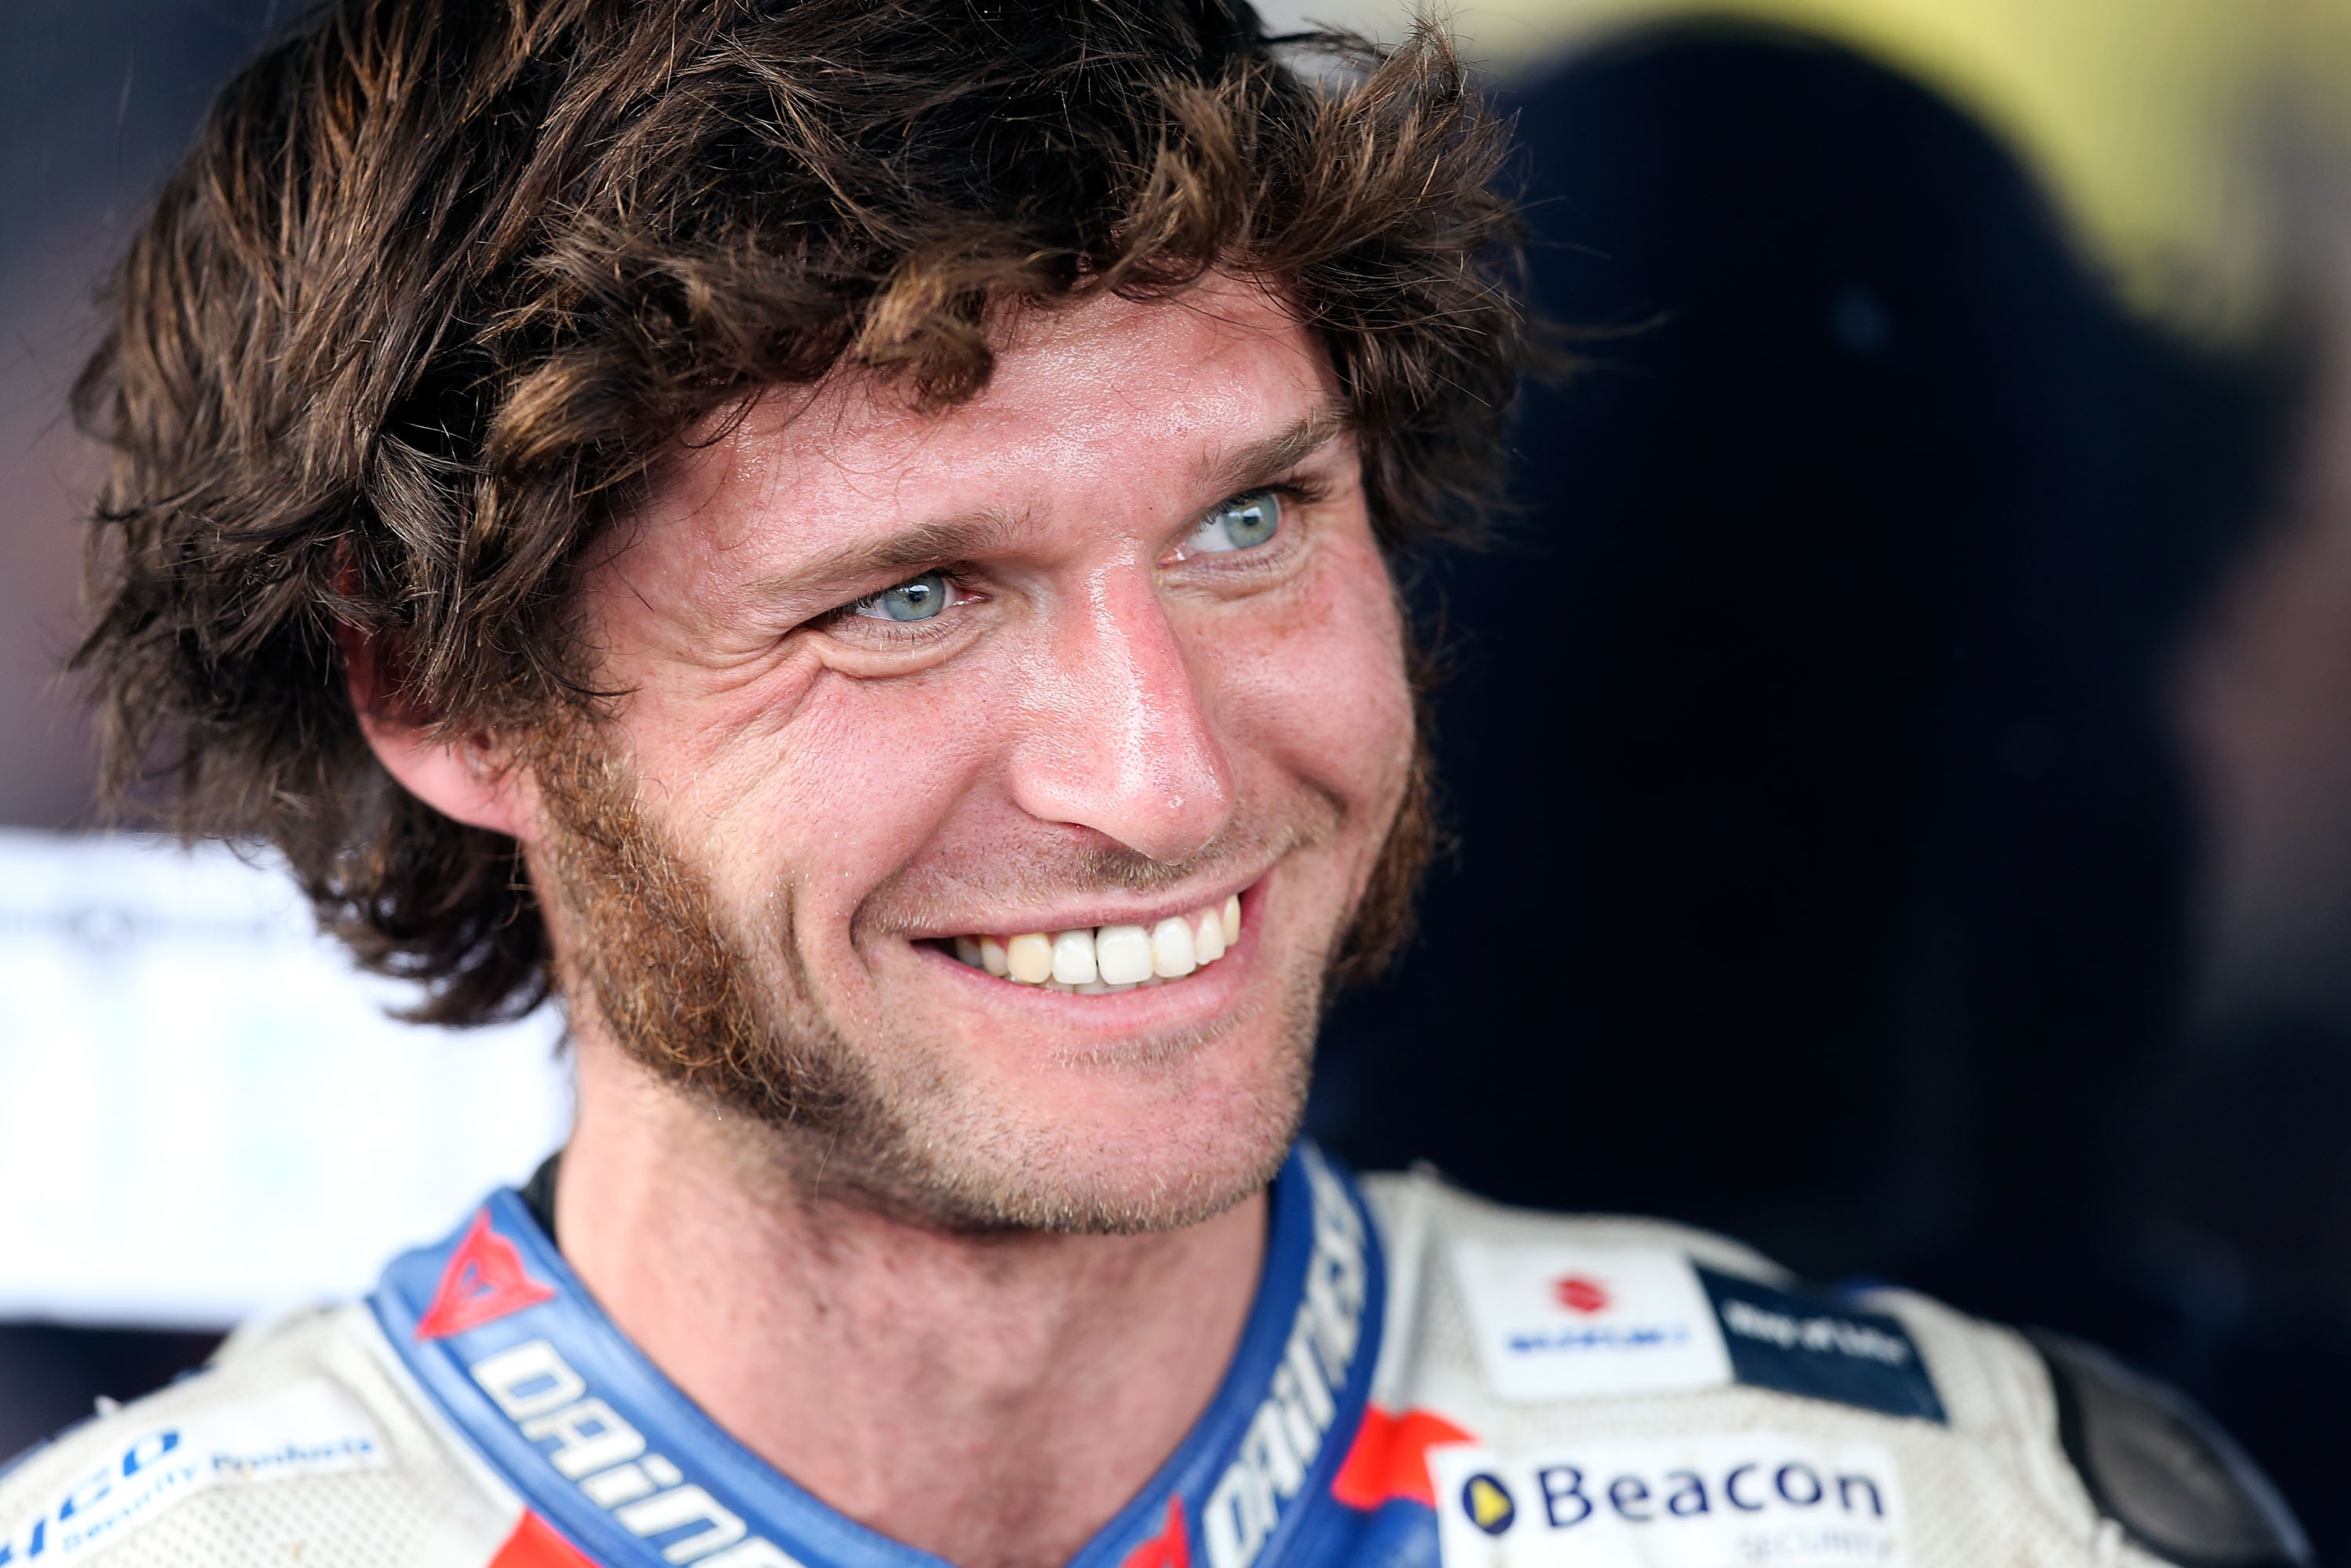 Guy Martin doesn't want to race in the 2016 TT or North West 200